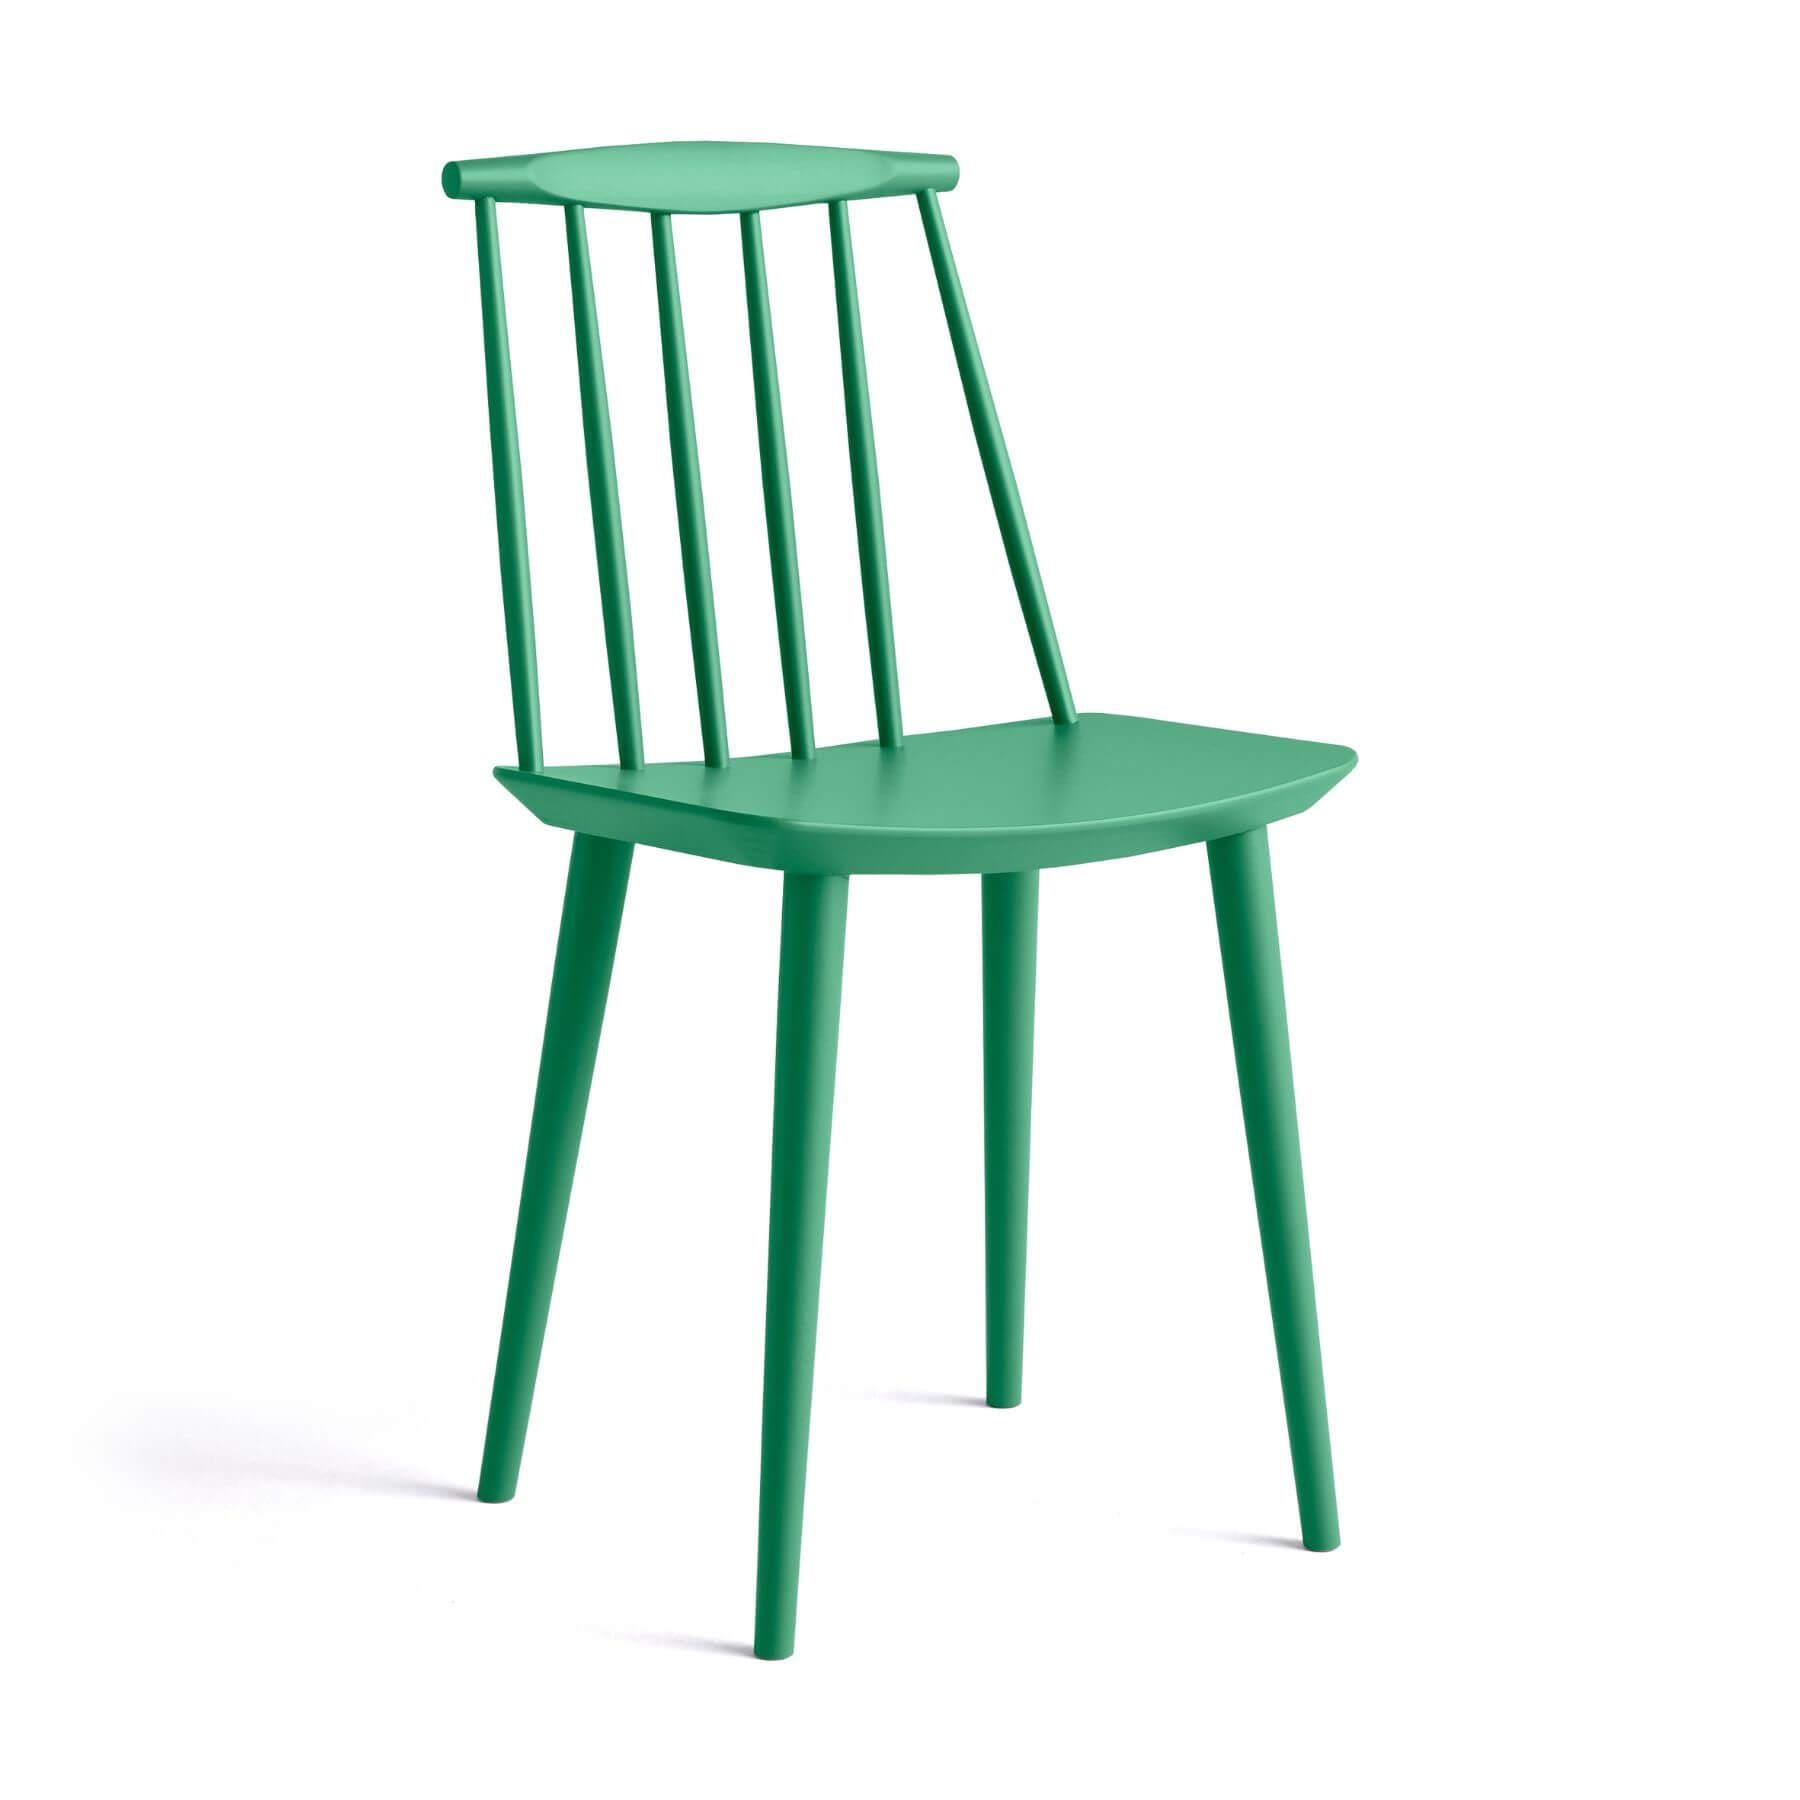 Hay Jseries 77 Dining Chair Beech Lacquered Jade Green Felt Gliders Designer Furniture From Holloways Of Ludlow